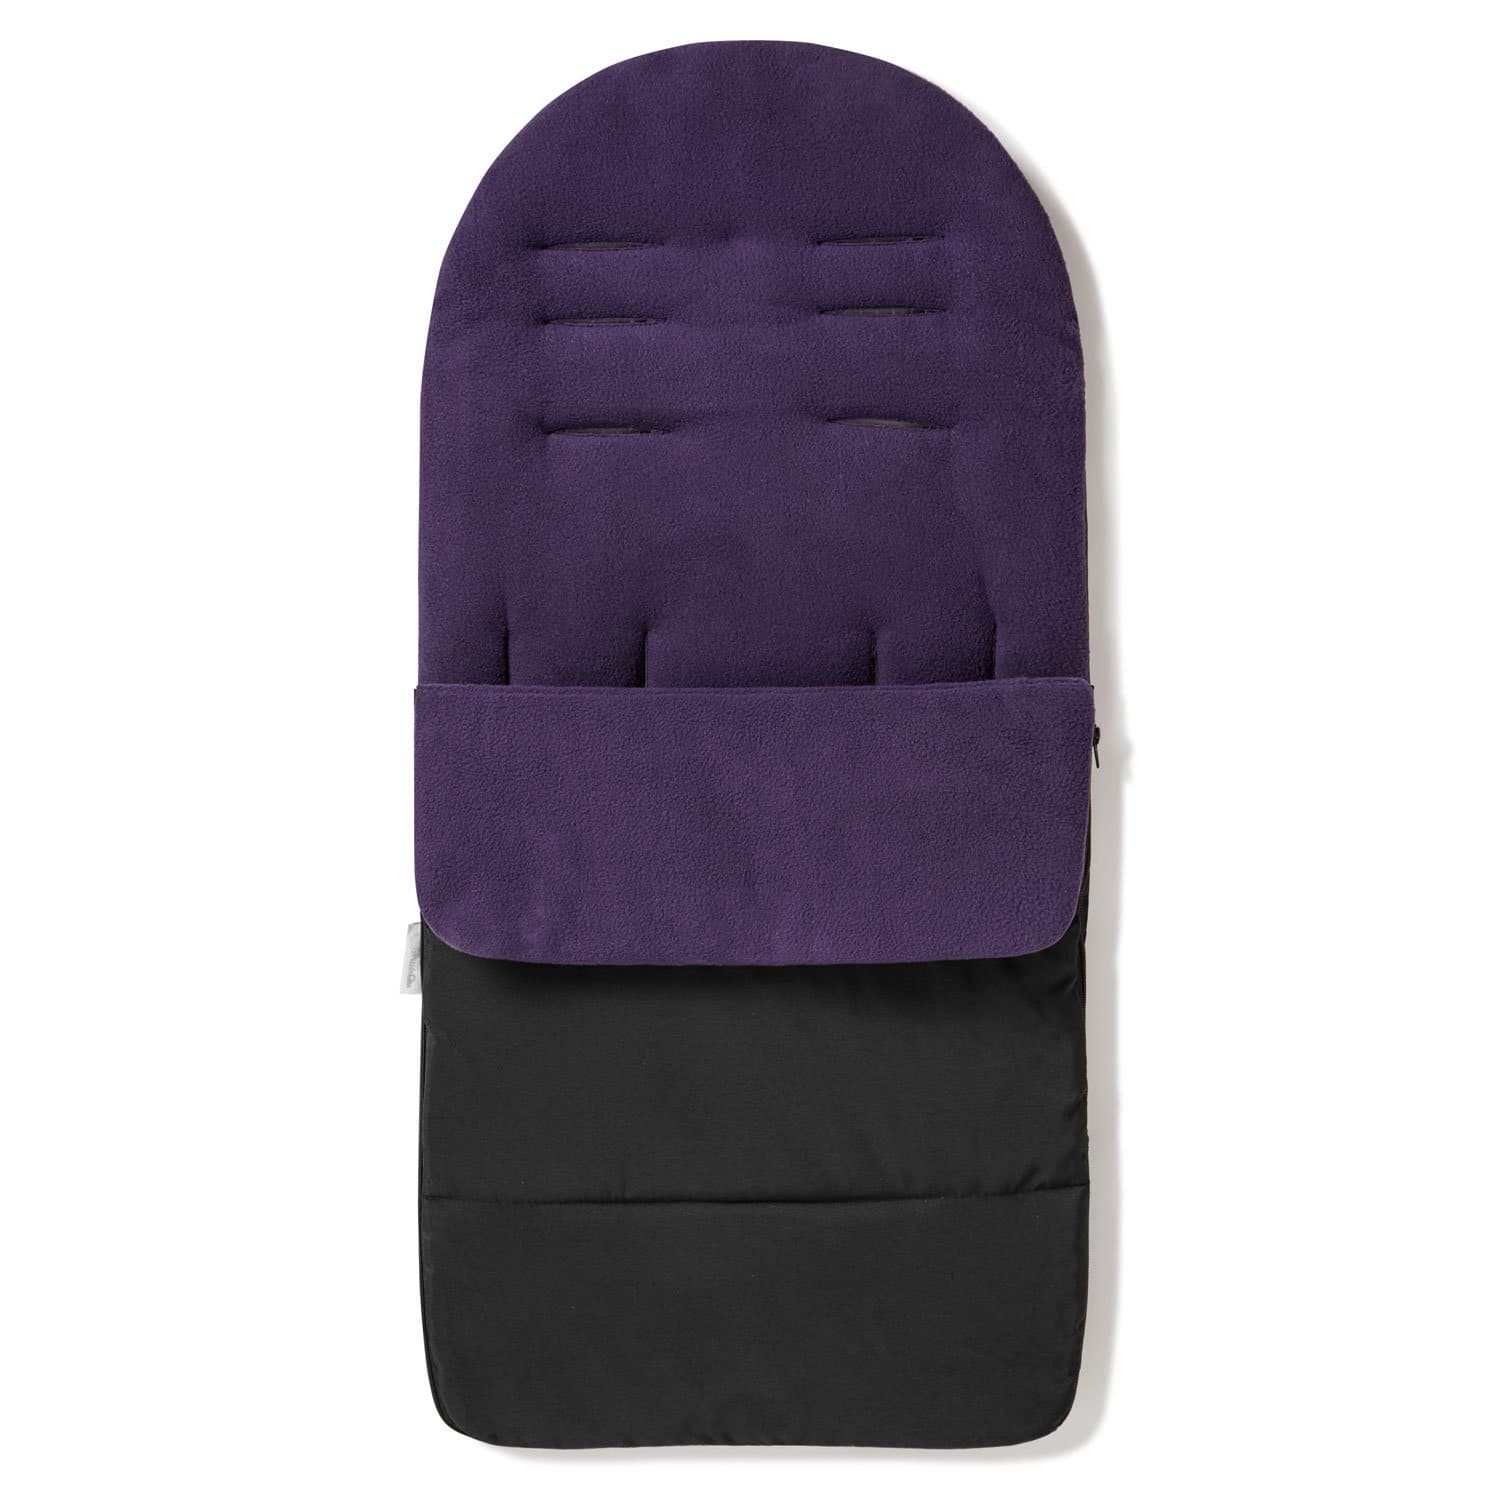 Premium Footmuff / Cosy Toes Compatible with Petite - Plum Purple / Fits All Models | For Your Little One